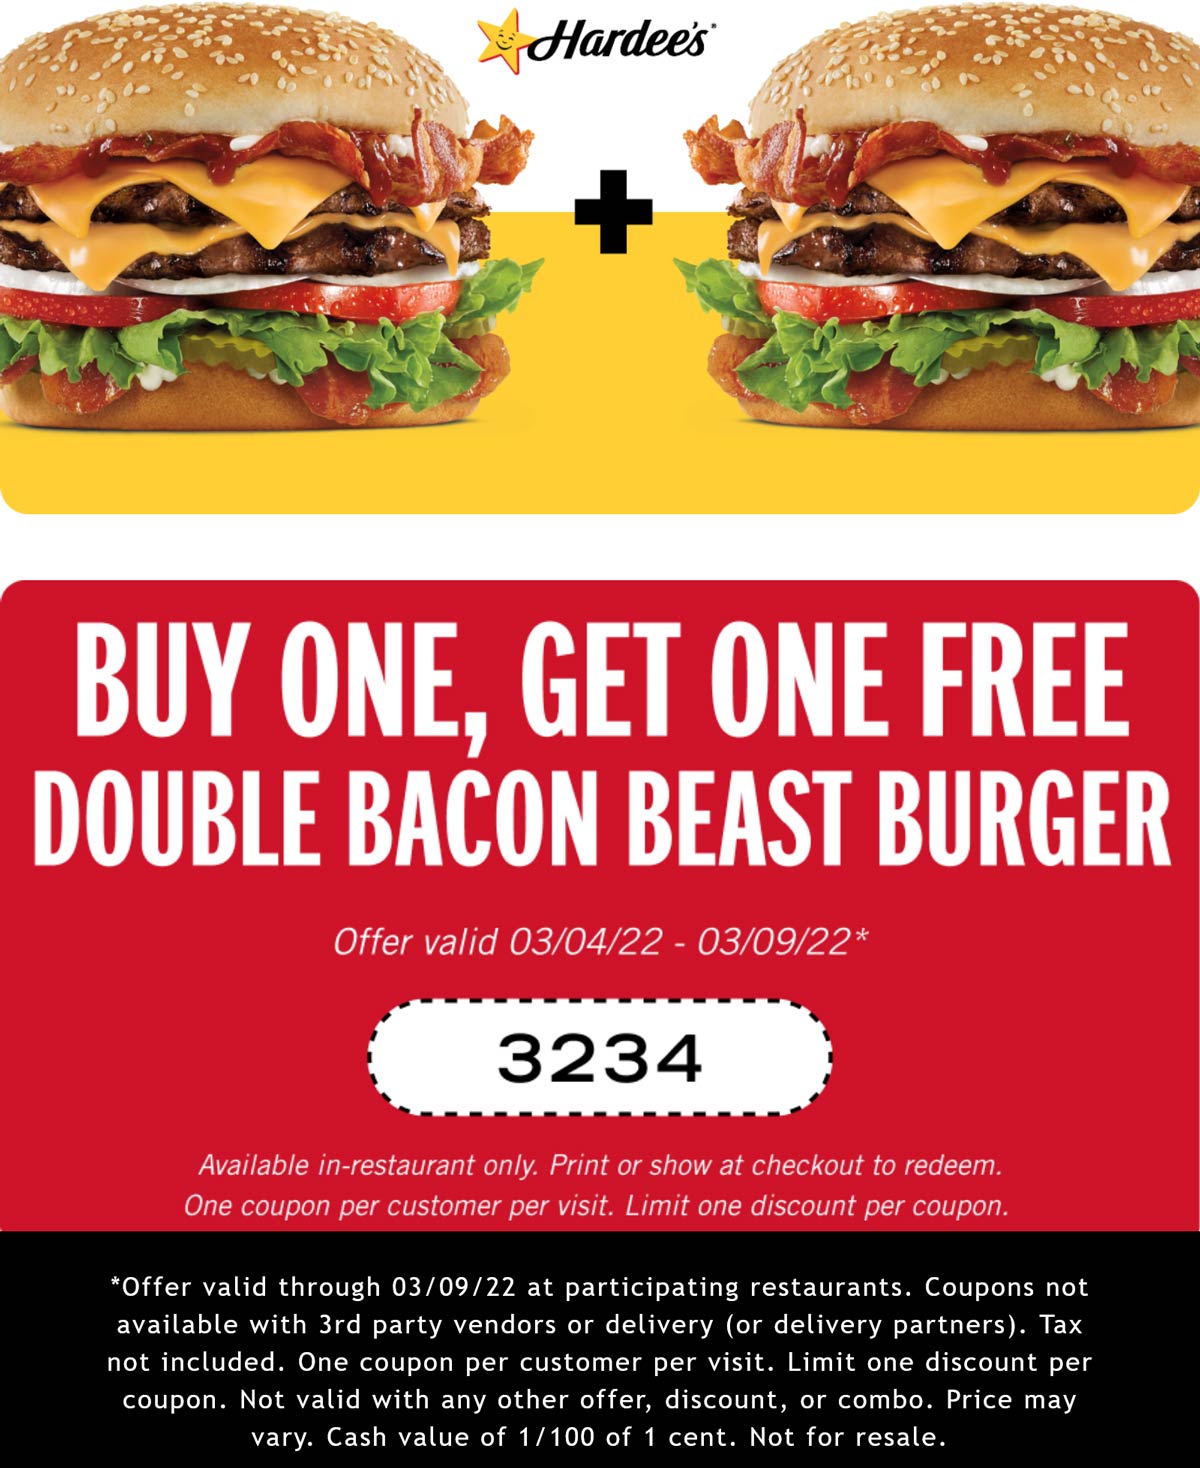 Hardees restaurants Coupon  Second double bacon beast cheeseburger free at Hardees #hardees 